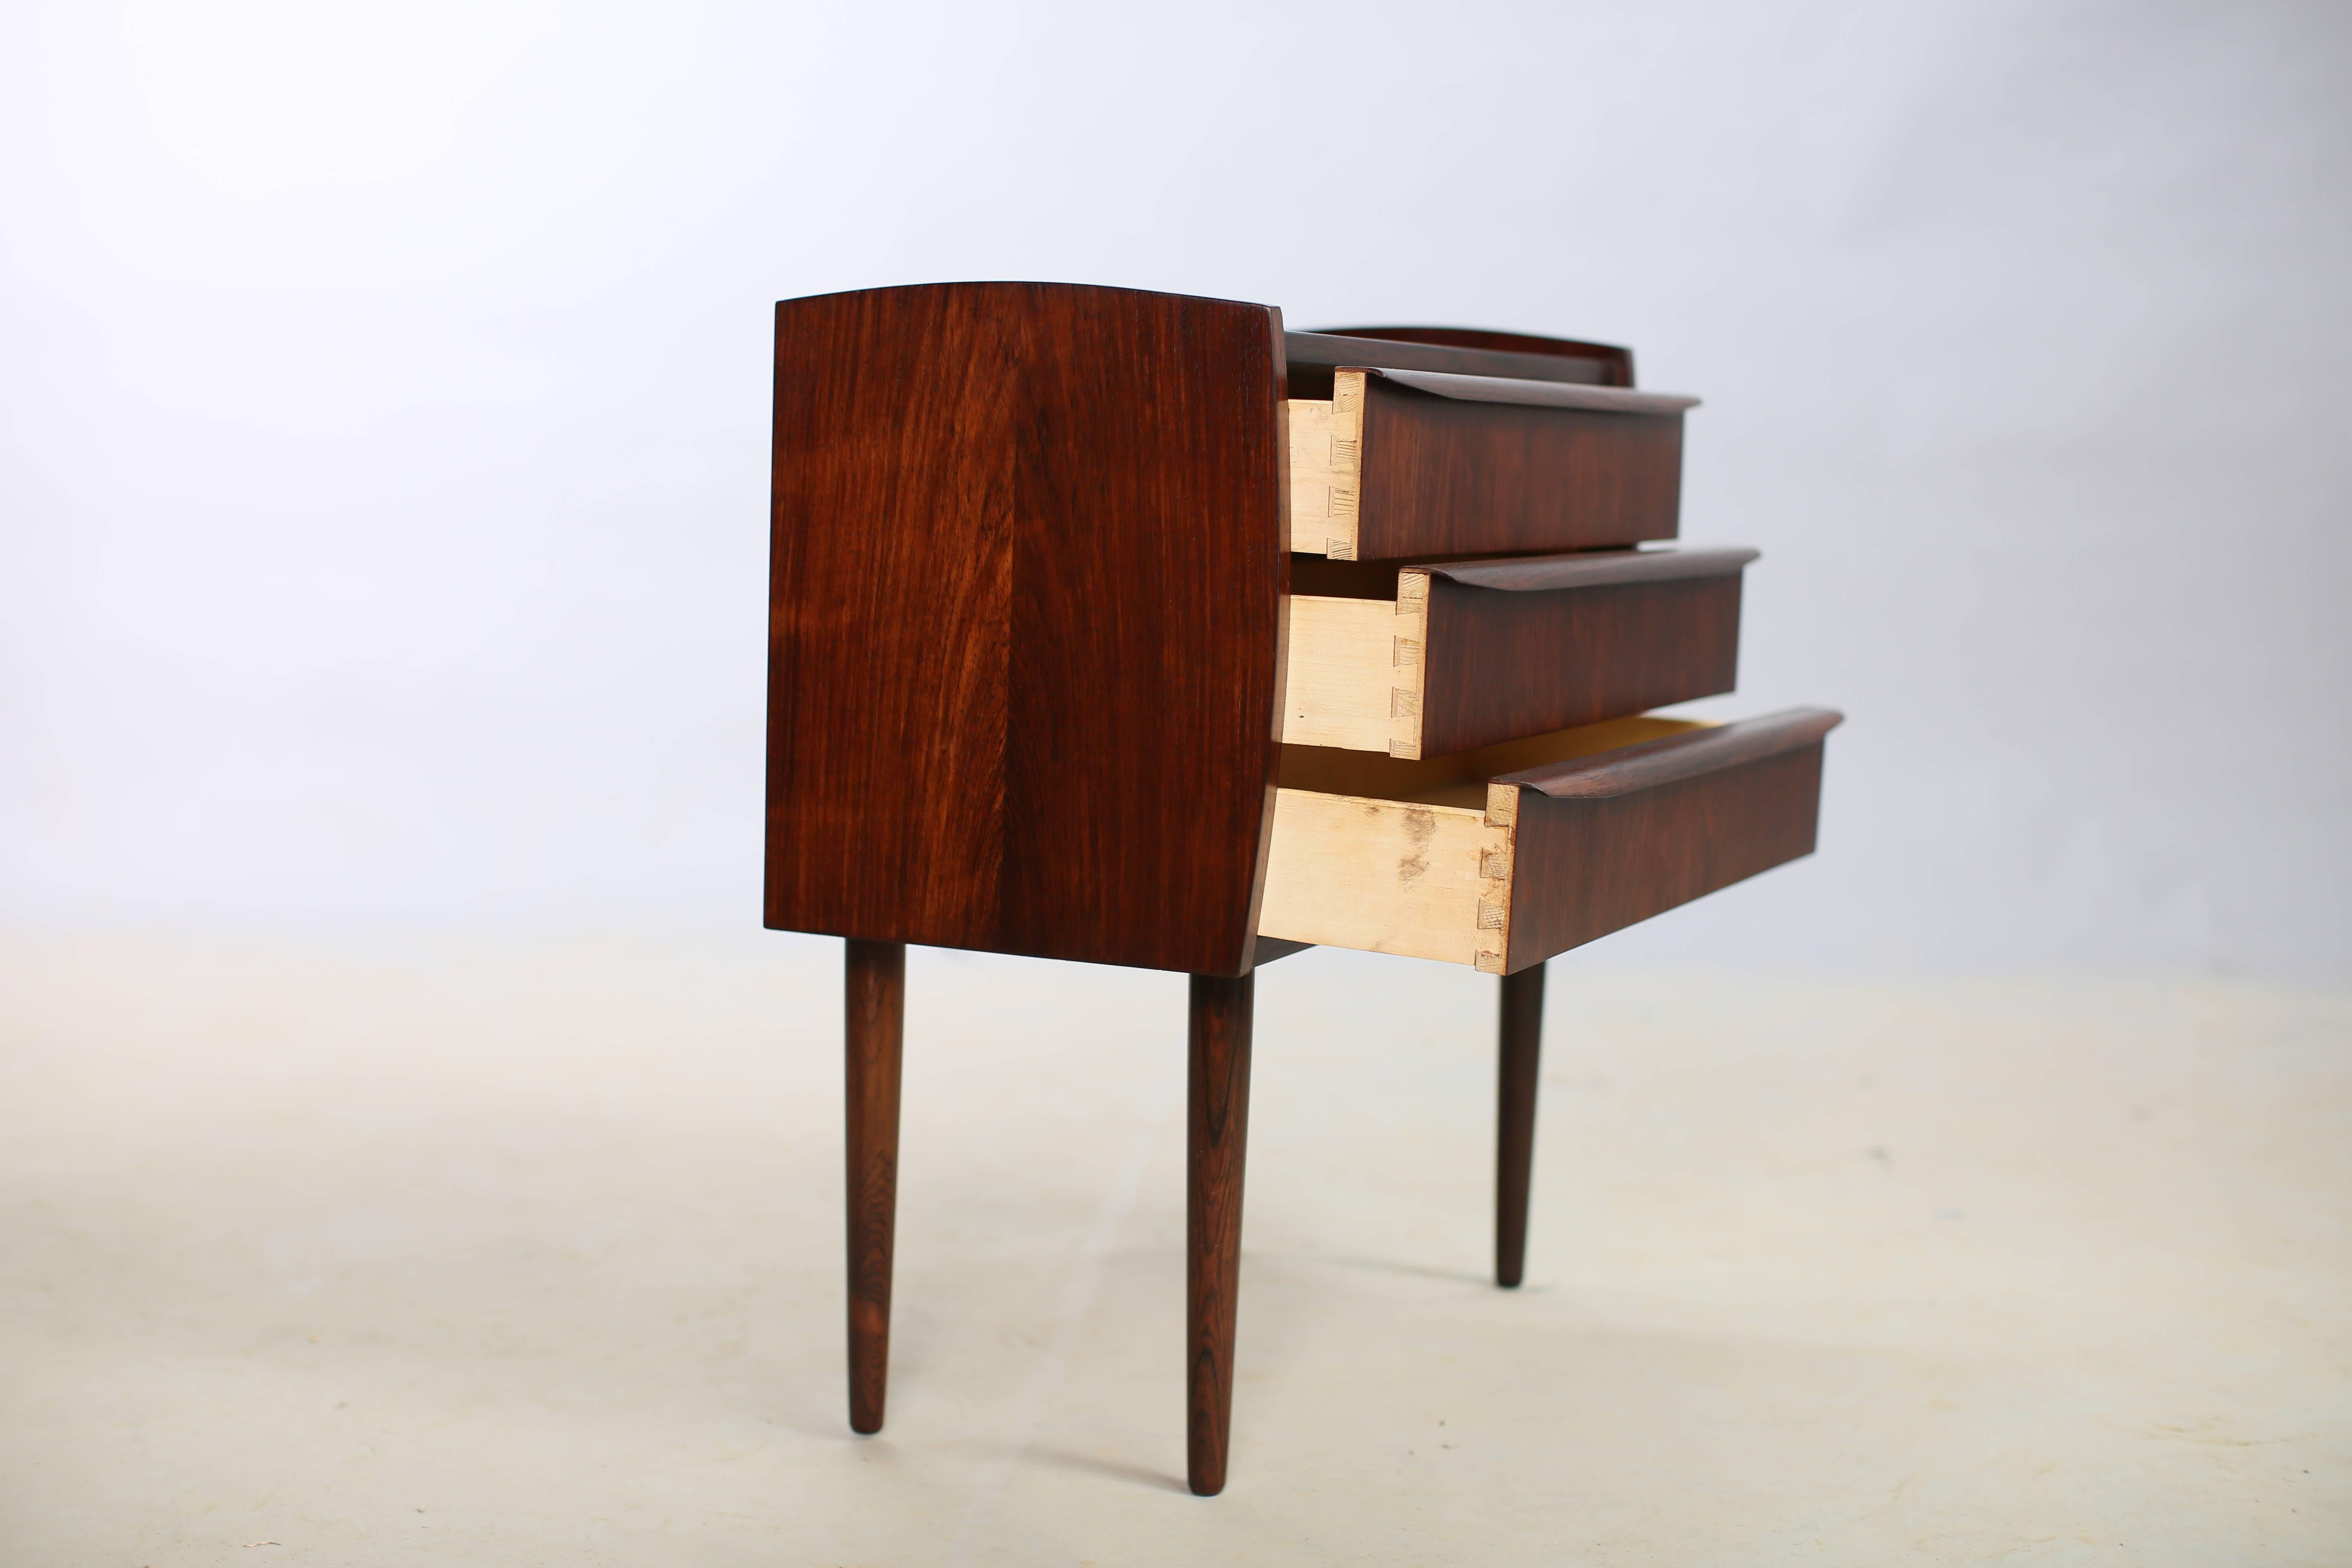 Vintage 1960s Danish Bedside Tables.

This pair of Danish nightstands is in excellent condition. Three drawers in each table give both sides of the bed a lot of storage. Ready for pick up, delivery or shipping anywhere in the world.